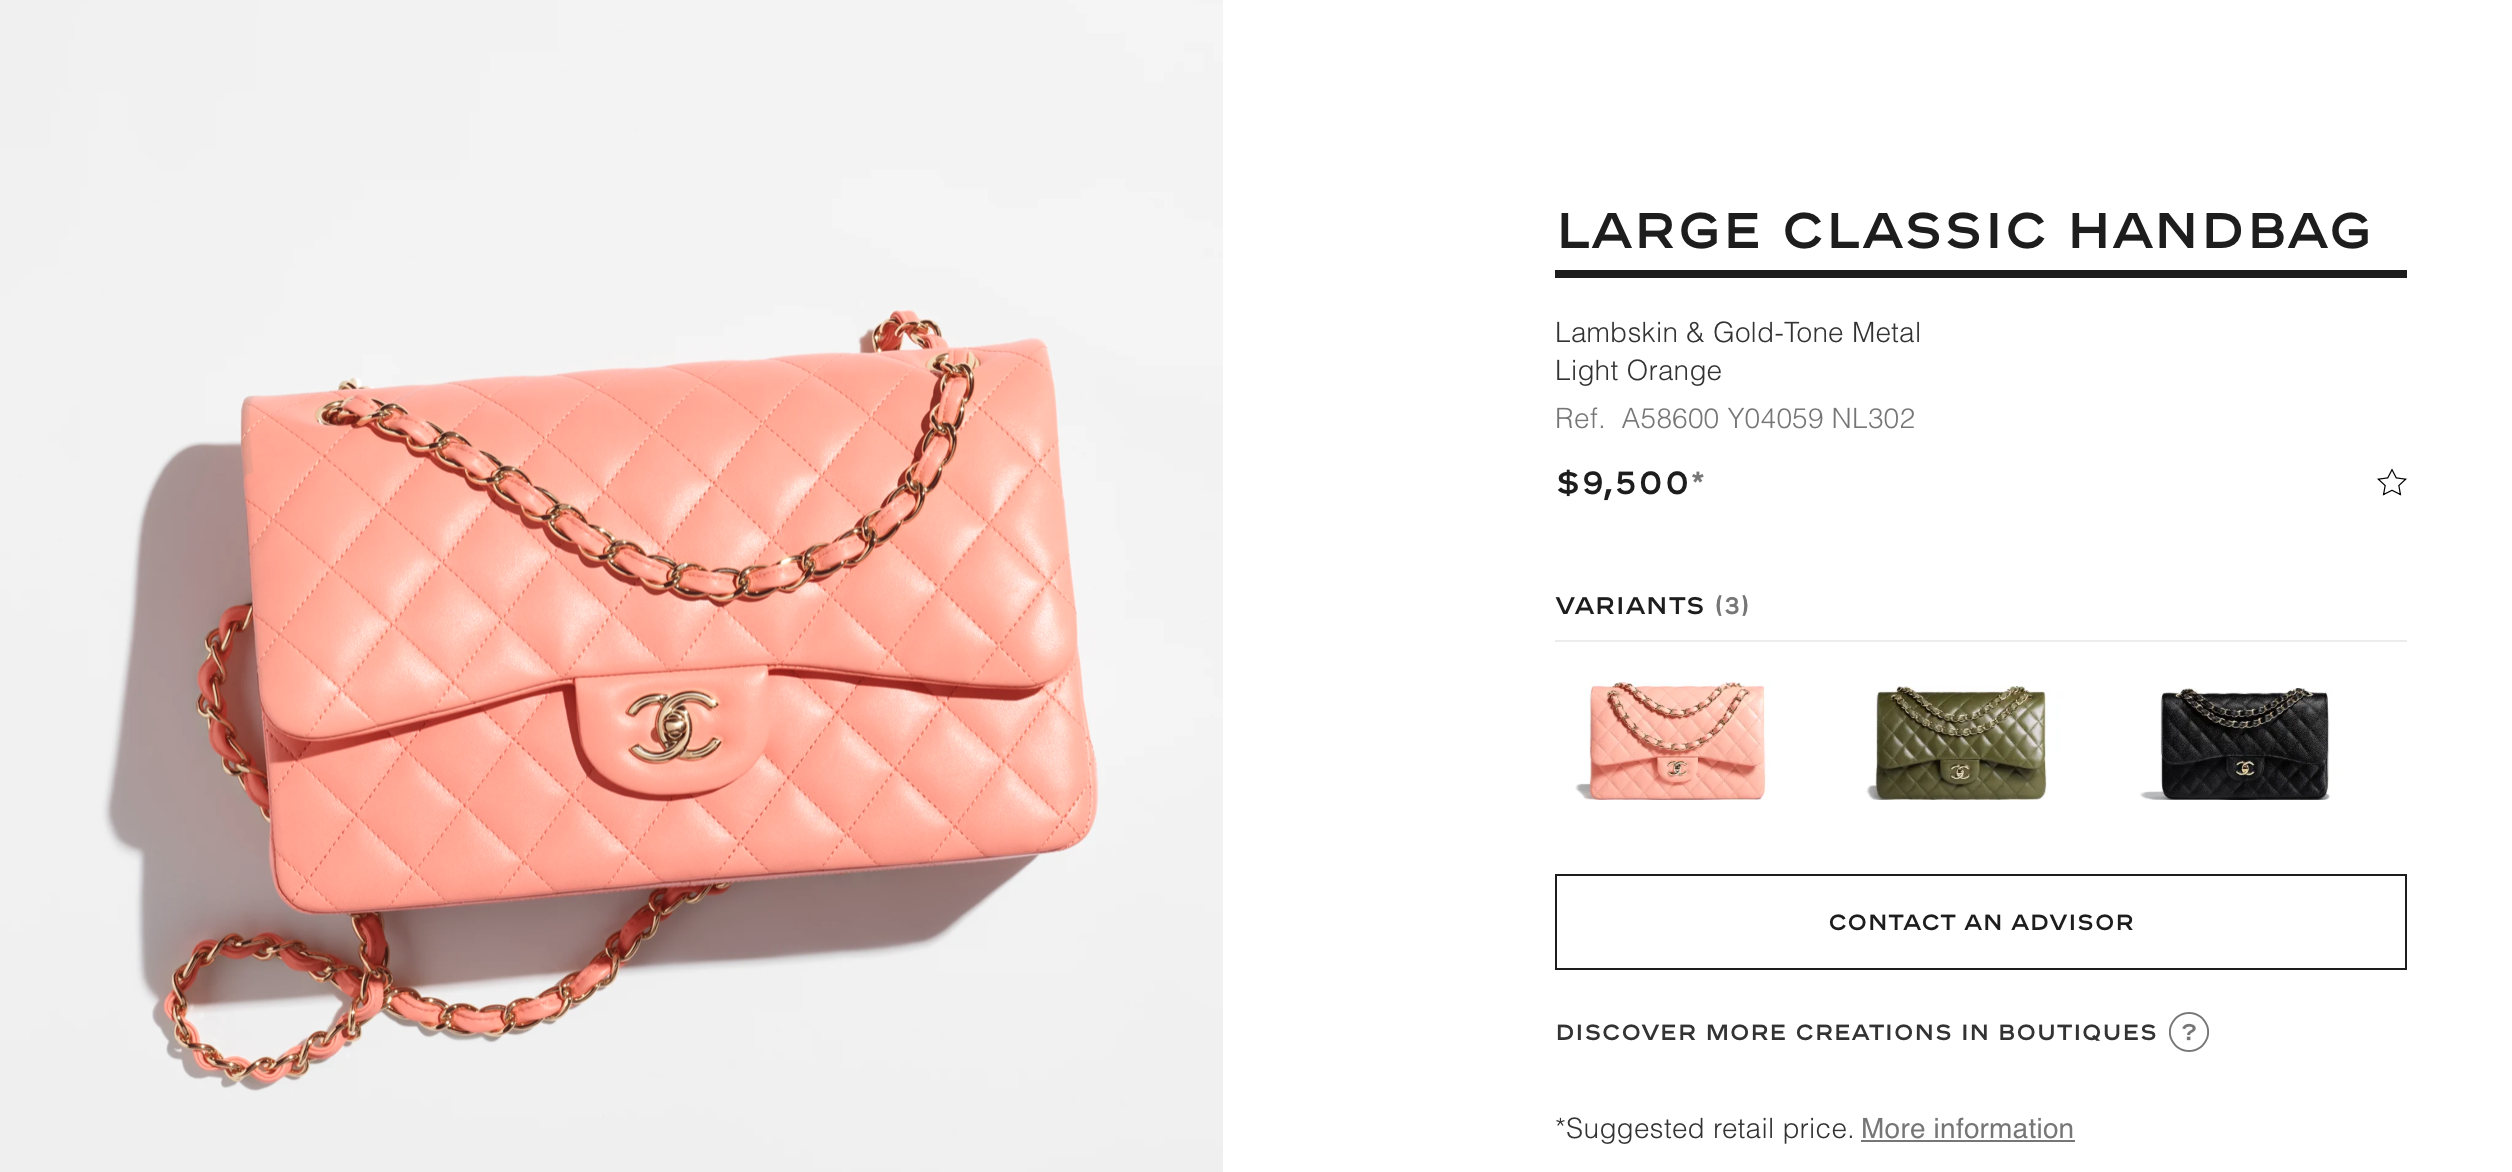 cheapest chanel item